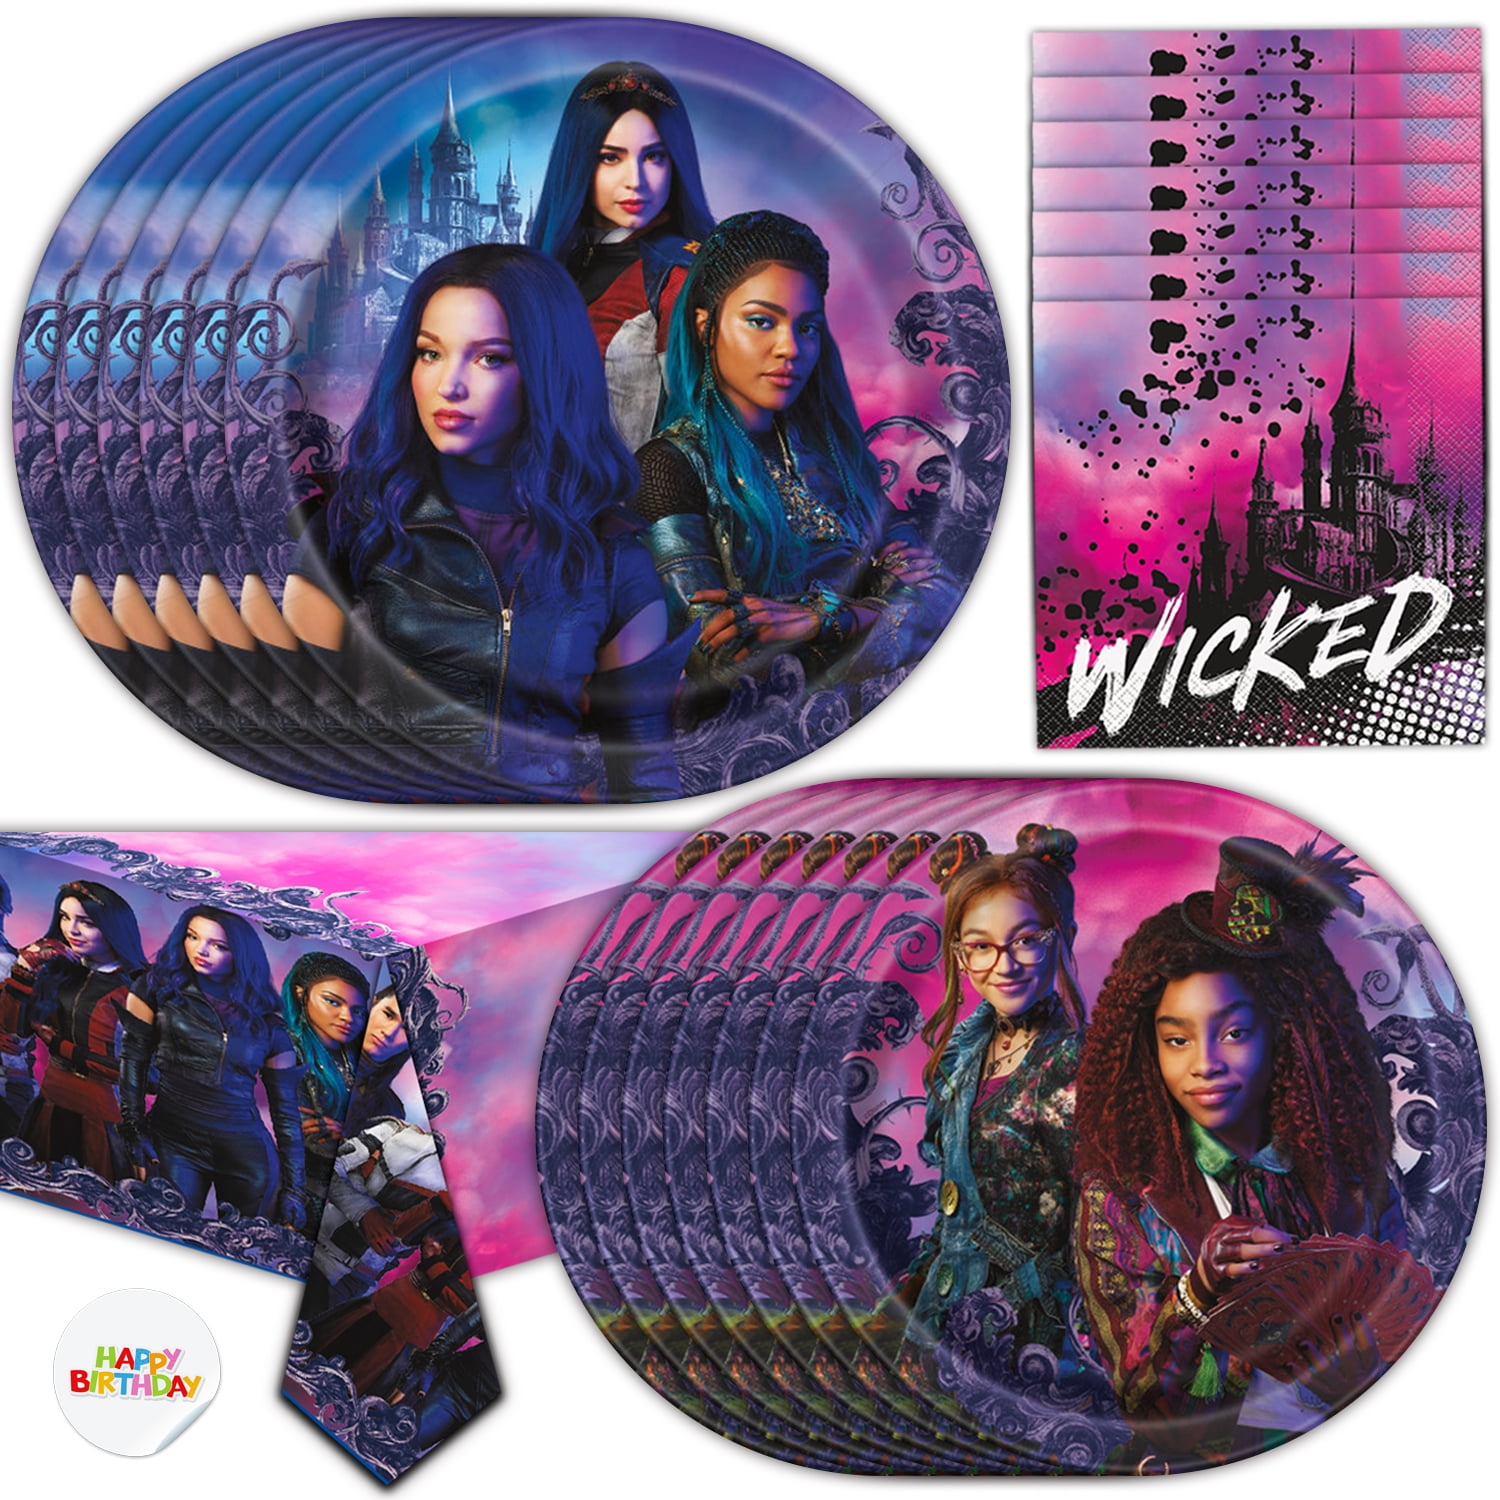 Descendants 3 Party Supplies for 16 - Large Plates, Dessert Plates,  Napkins, Table cover - Great Disney Decorative Birthday Set with Audrey,  Uma, Lady